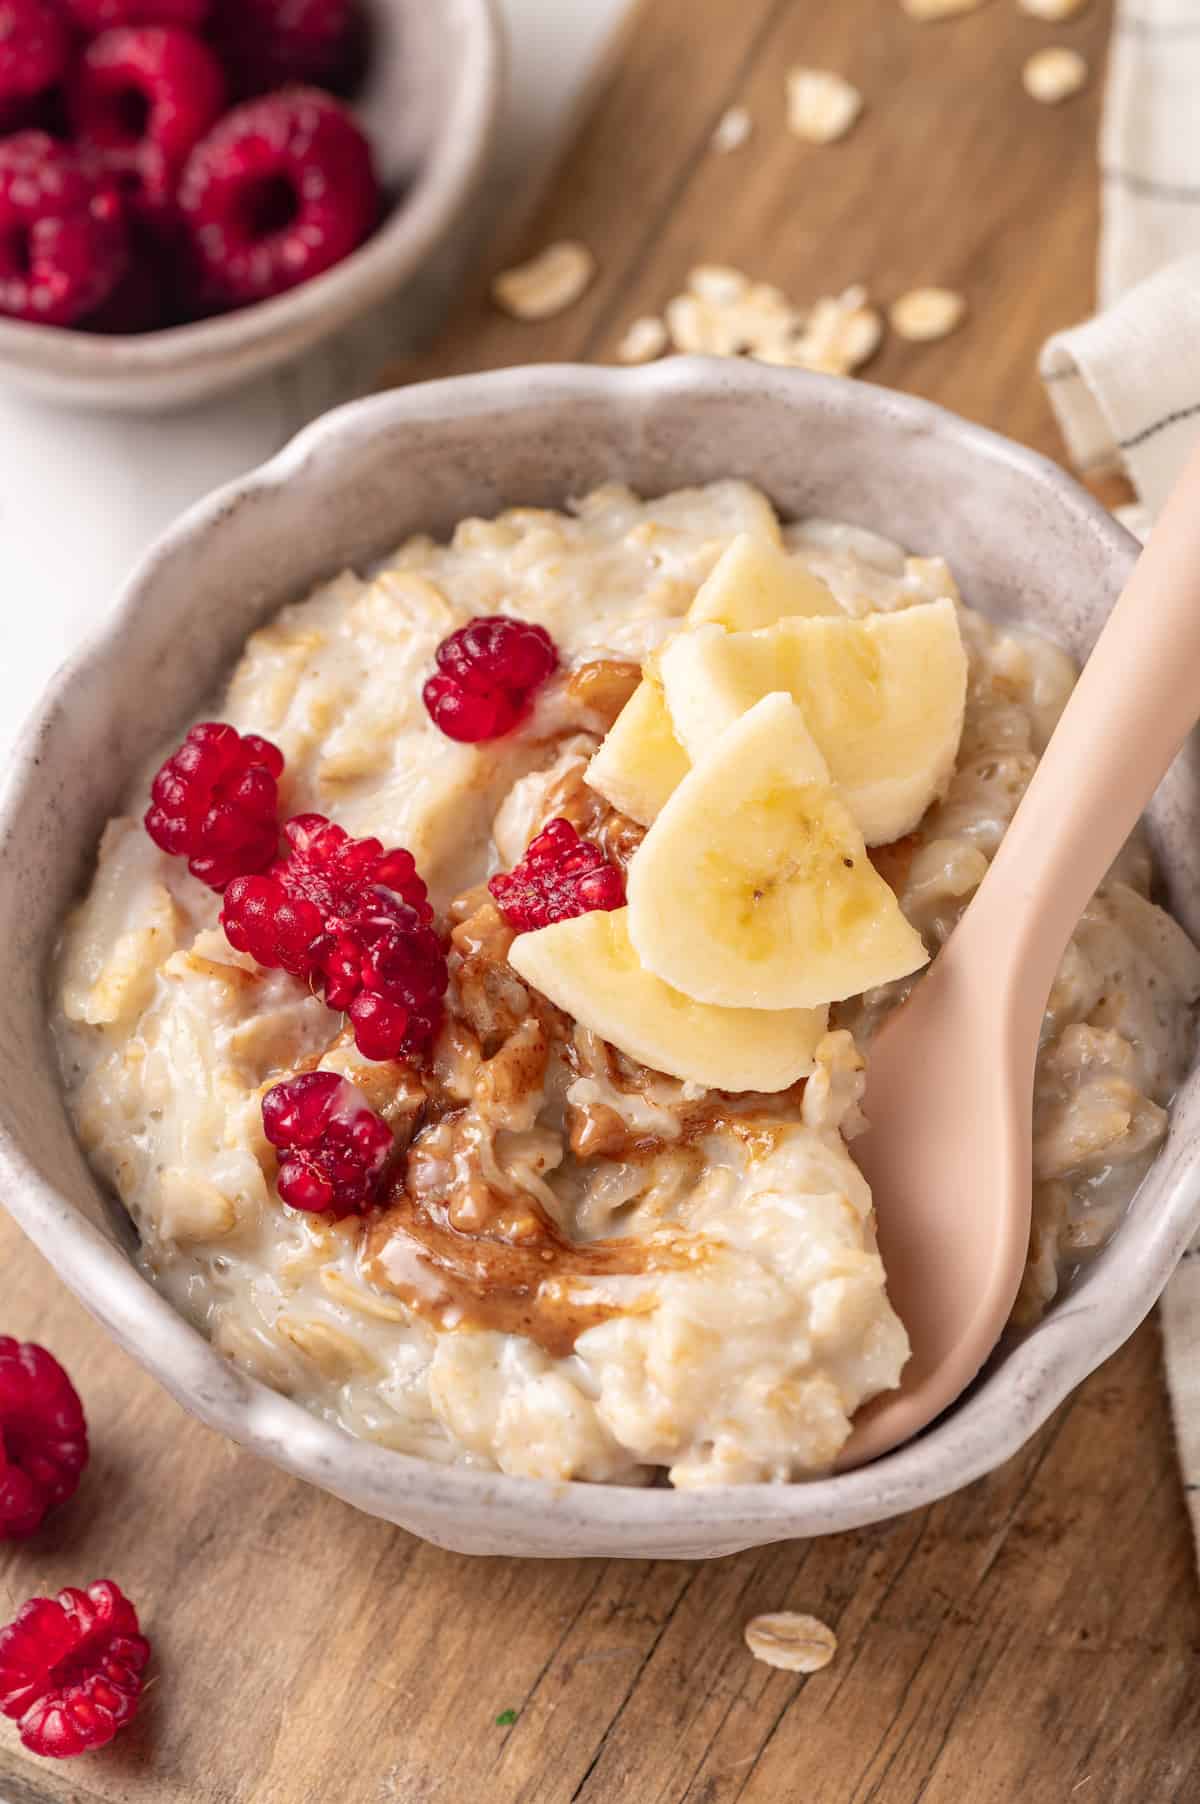 Baby oatmeal in bowl with banana, peanut butter, and berries